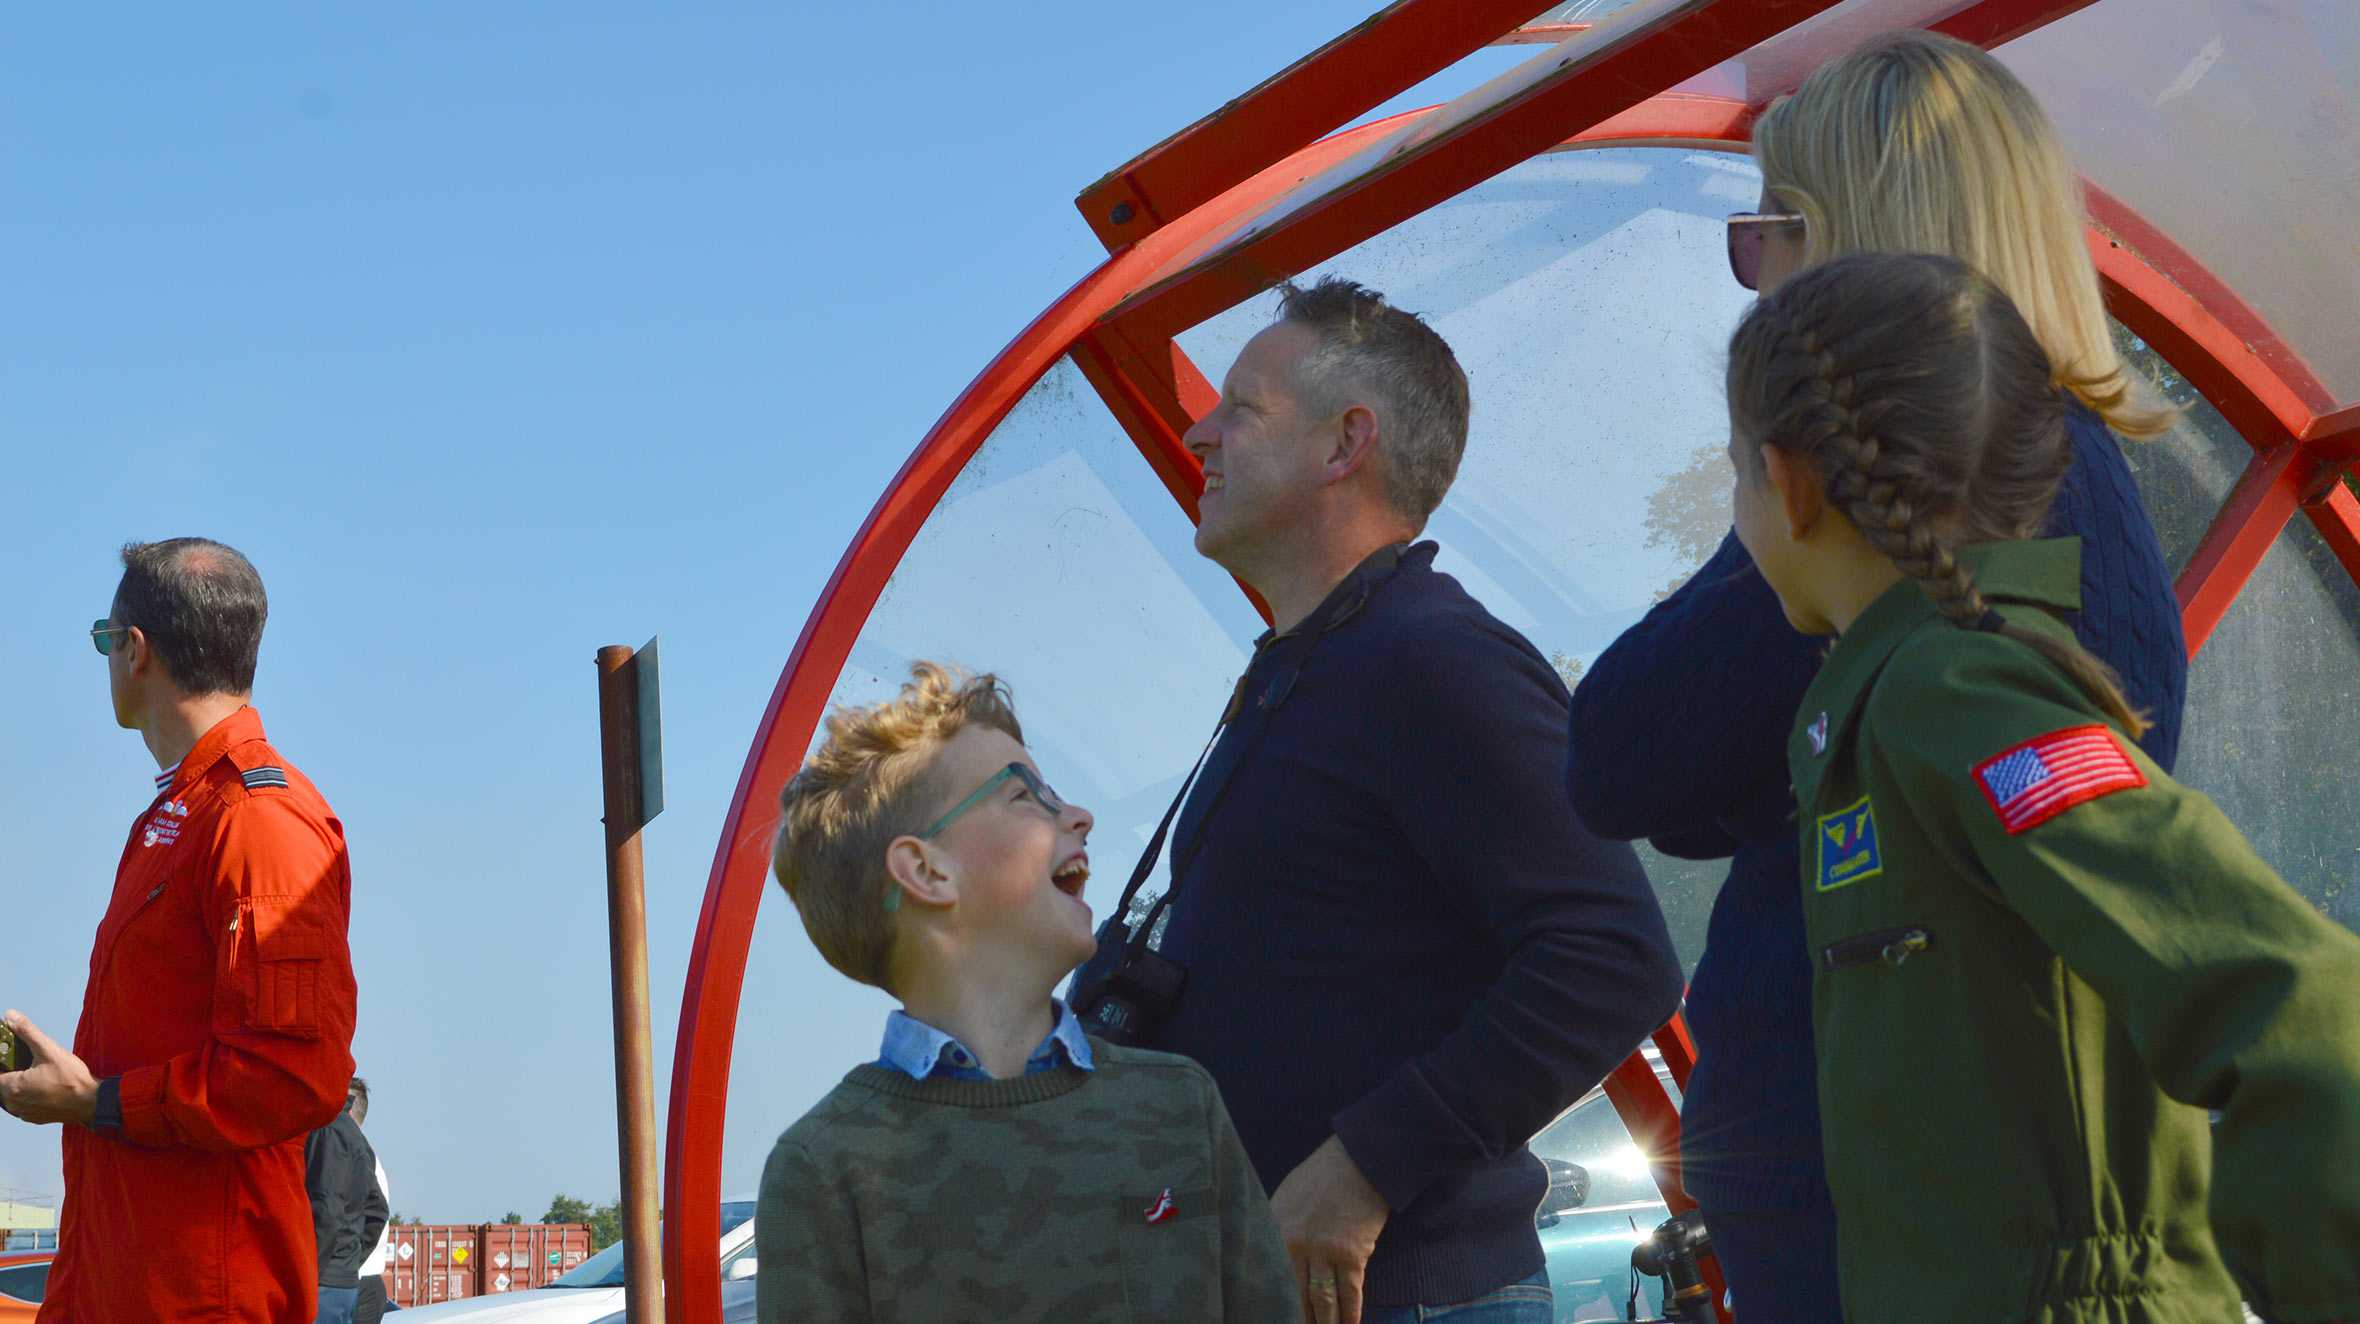 Wish child, John and his family enjoying a Red Arrows aerobatic display during his wish.